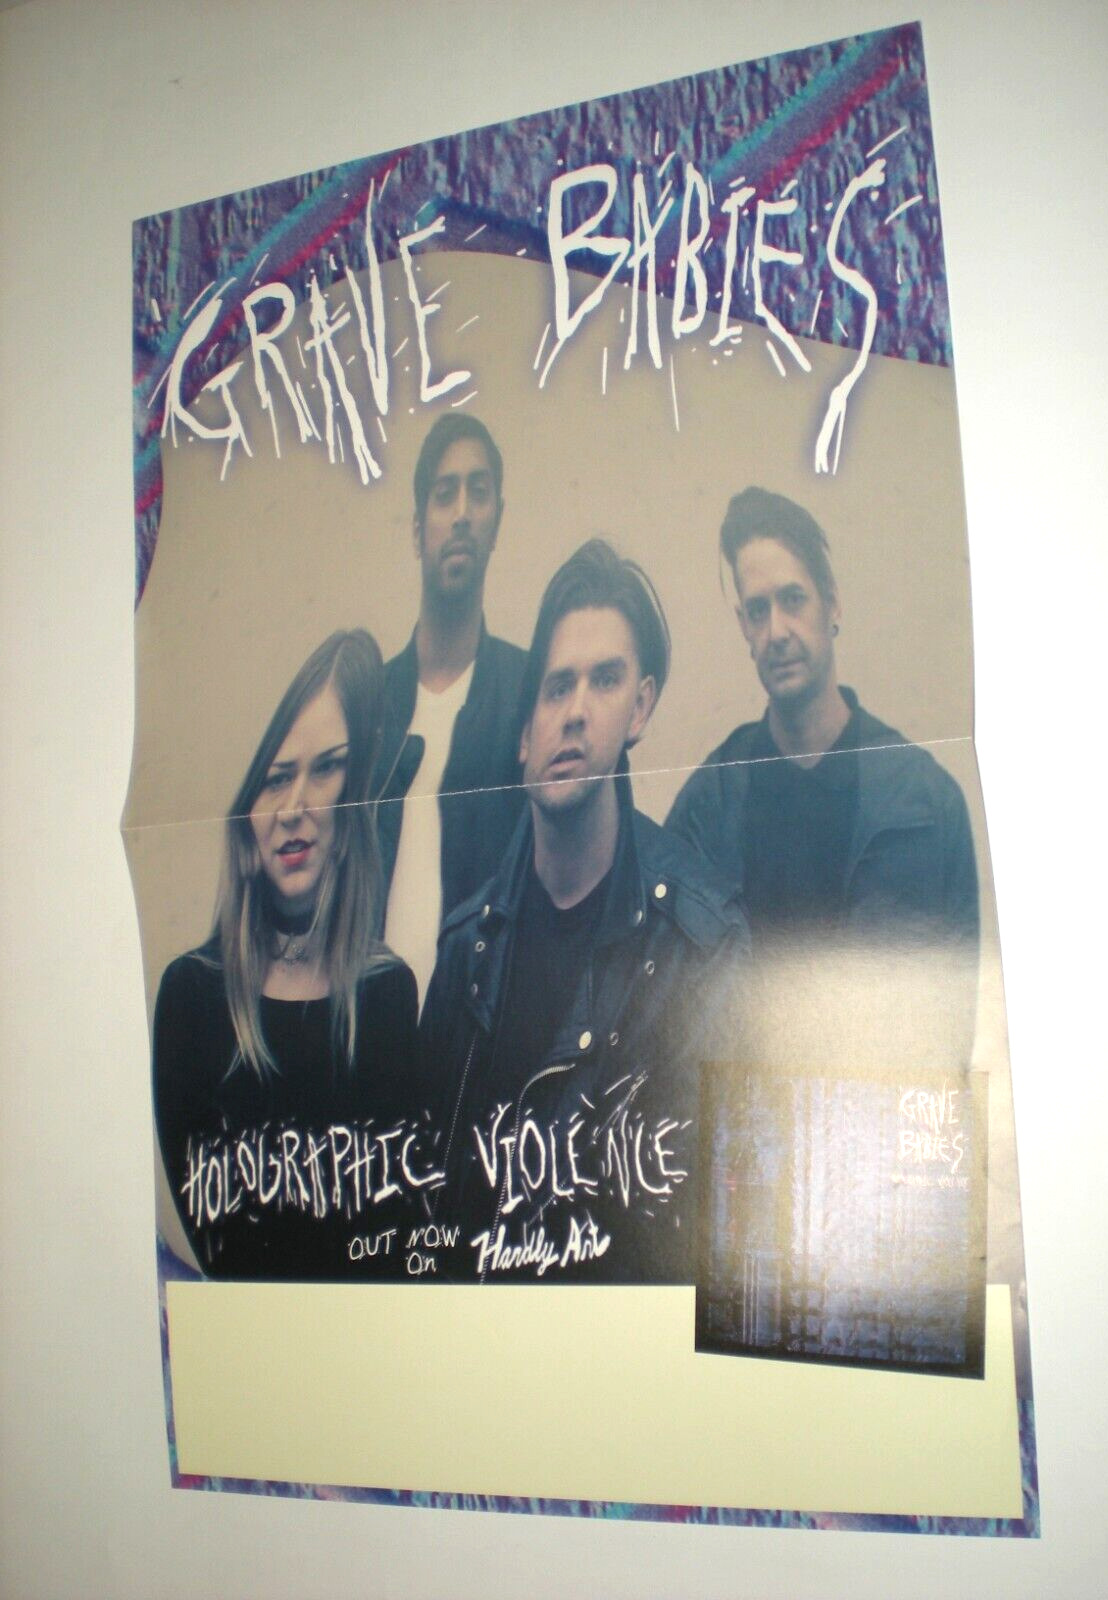 POSTER by GRAVE BABIES holographic violence Fr the Band album release tour art 8